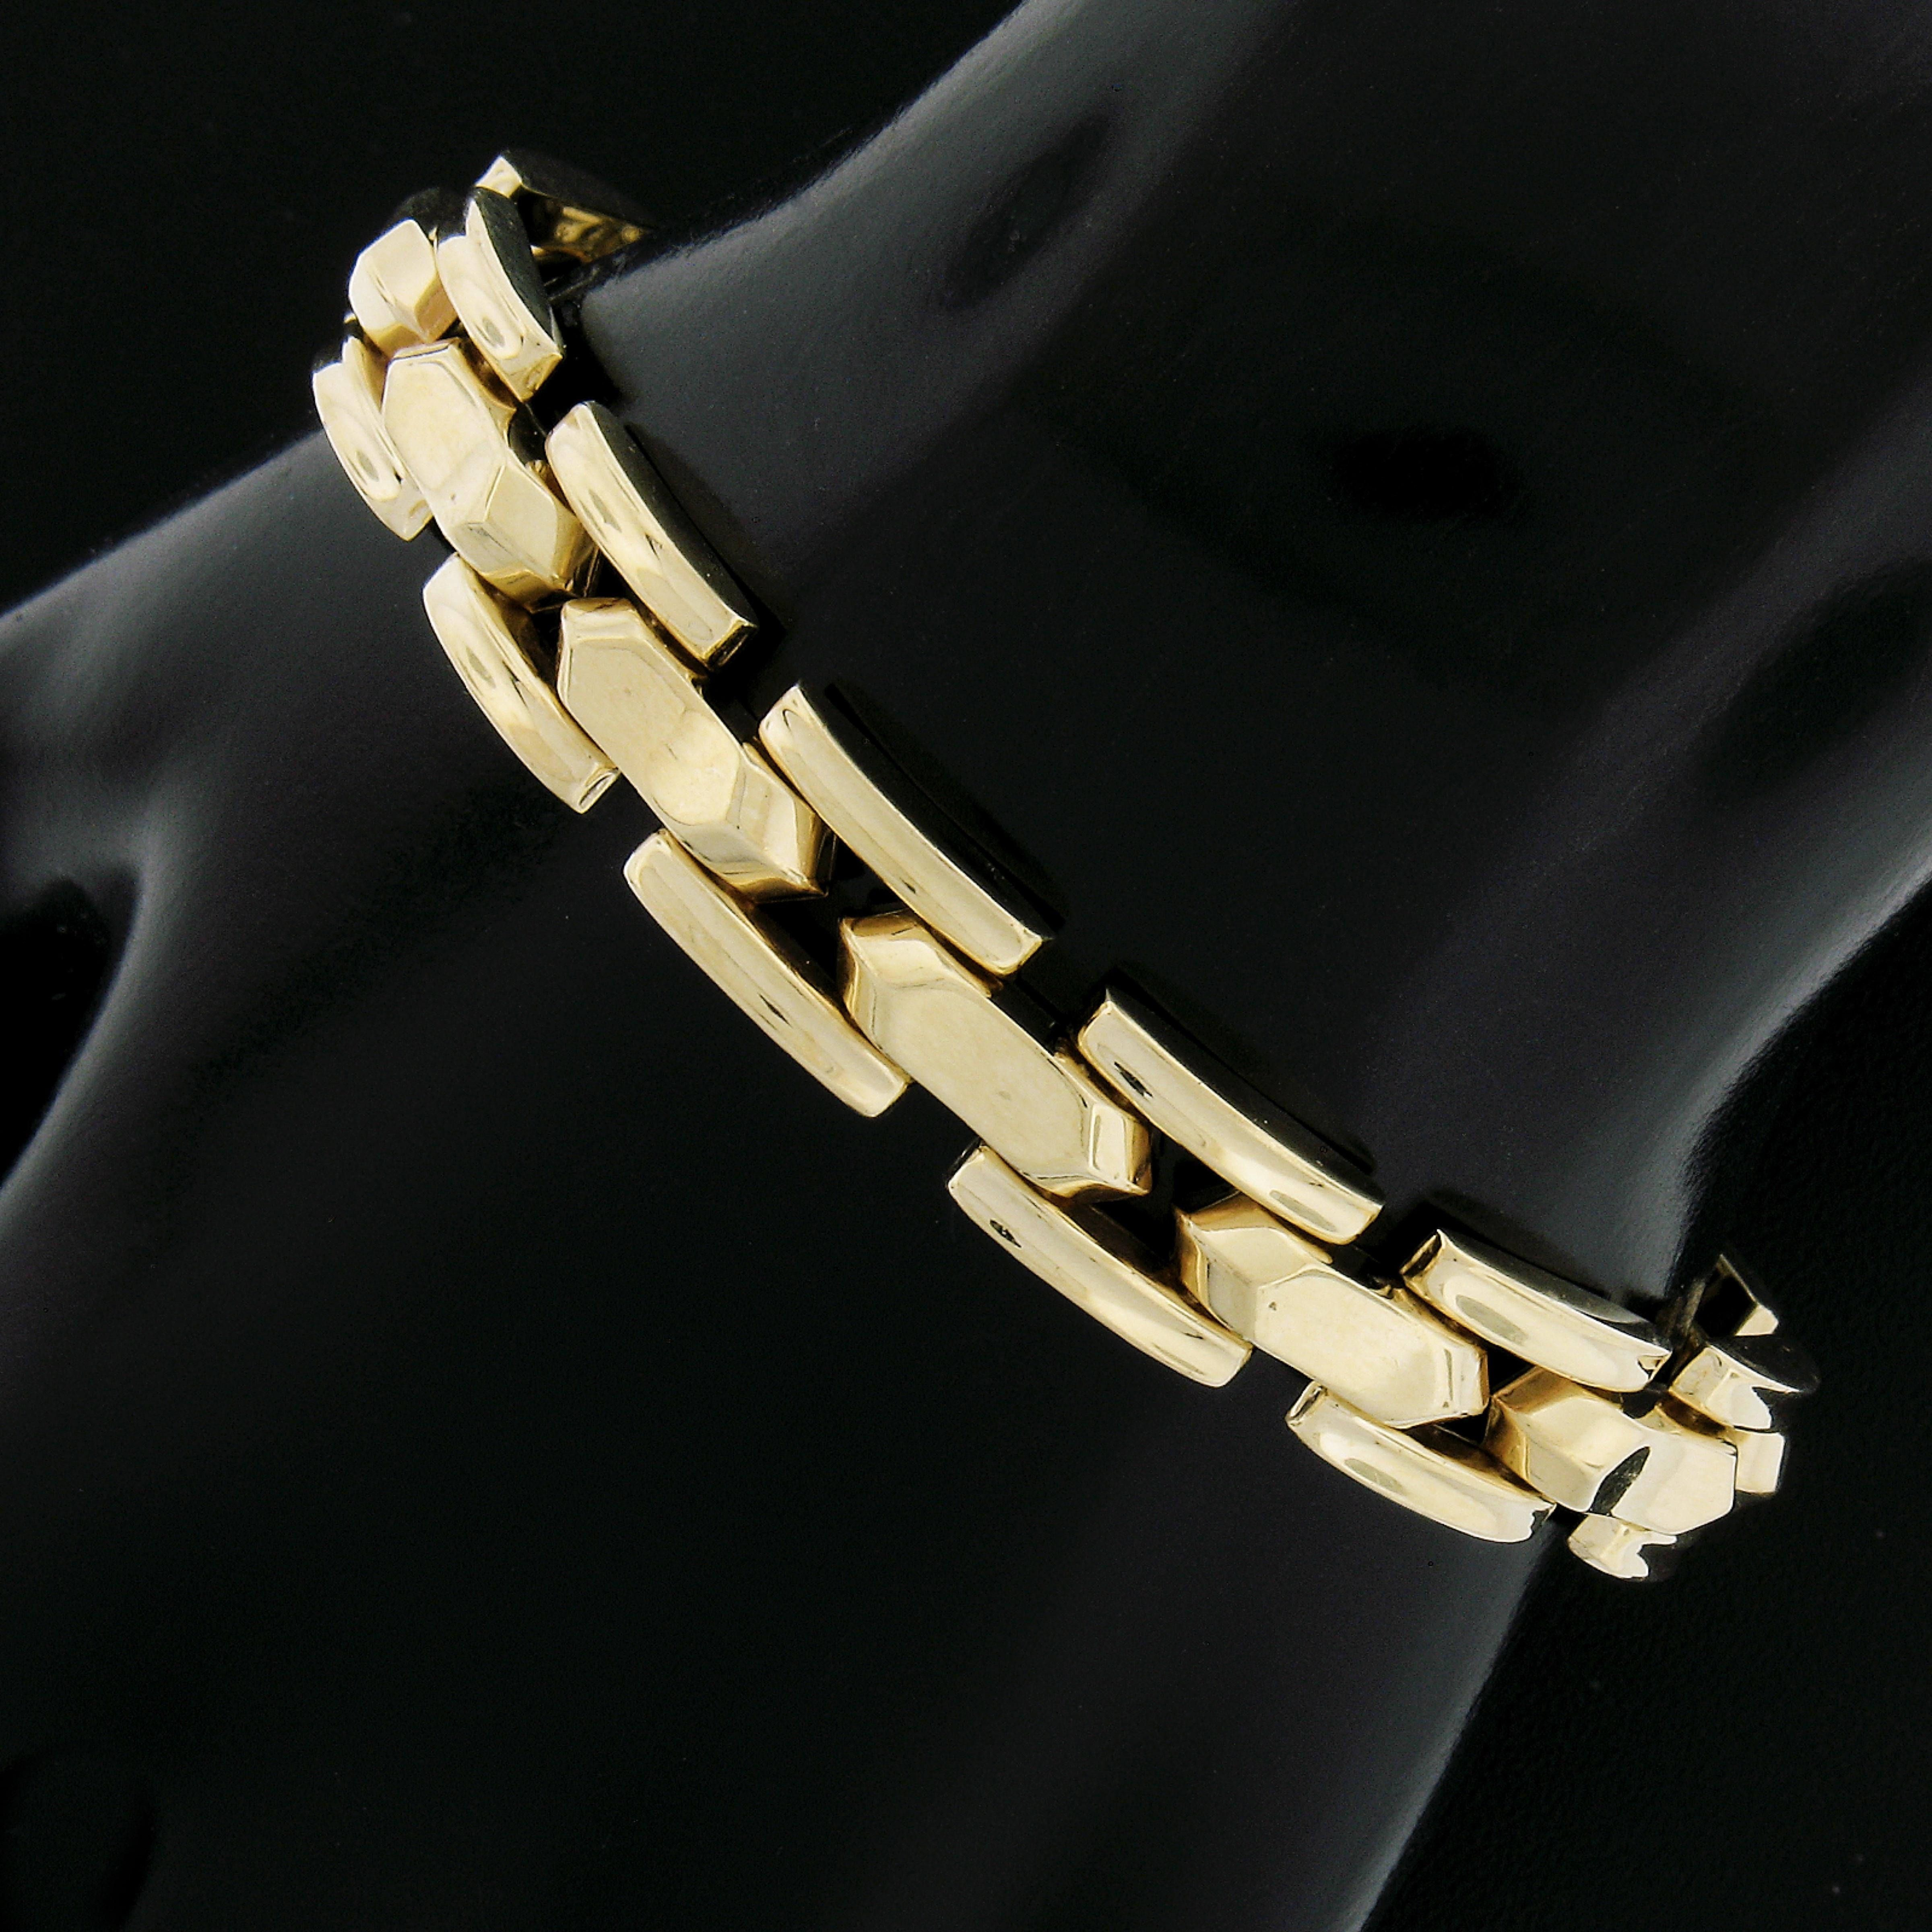 Material: Solid 14k Yellow Gold
Weight: 19.23 Grams
Chain Type: Geometric Open Link
Chain Length:	Will fit a 7 inch wrist (measured next to a ruler)
Chain Width: 9.1mm (0.36